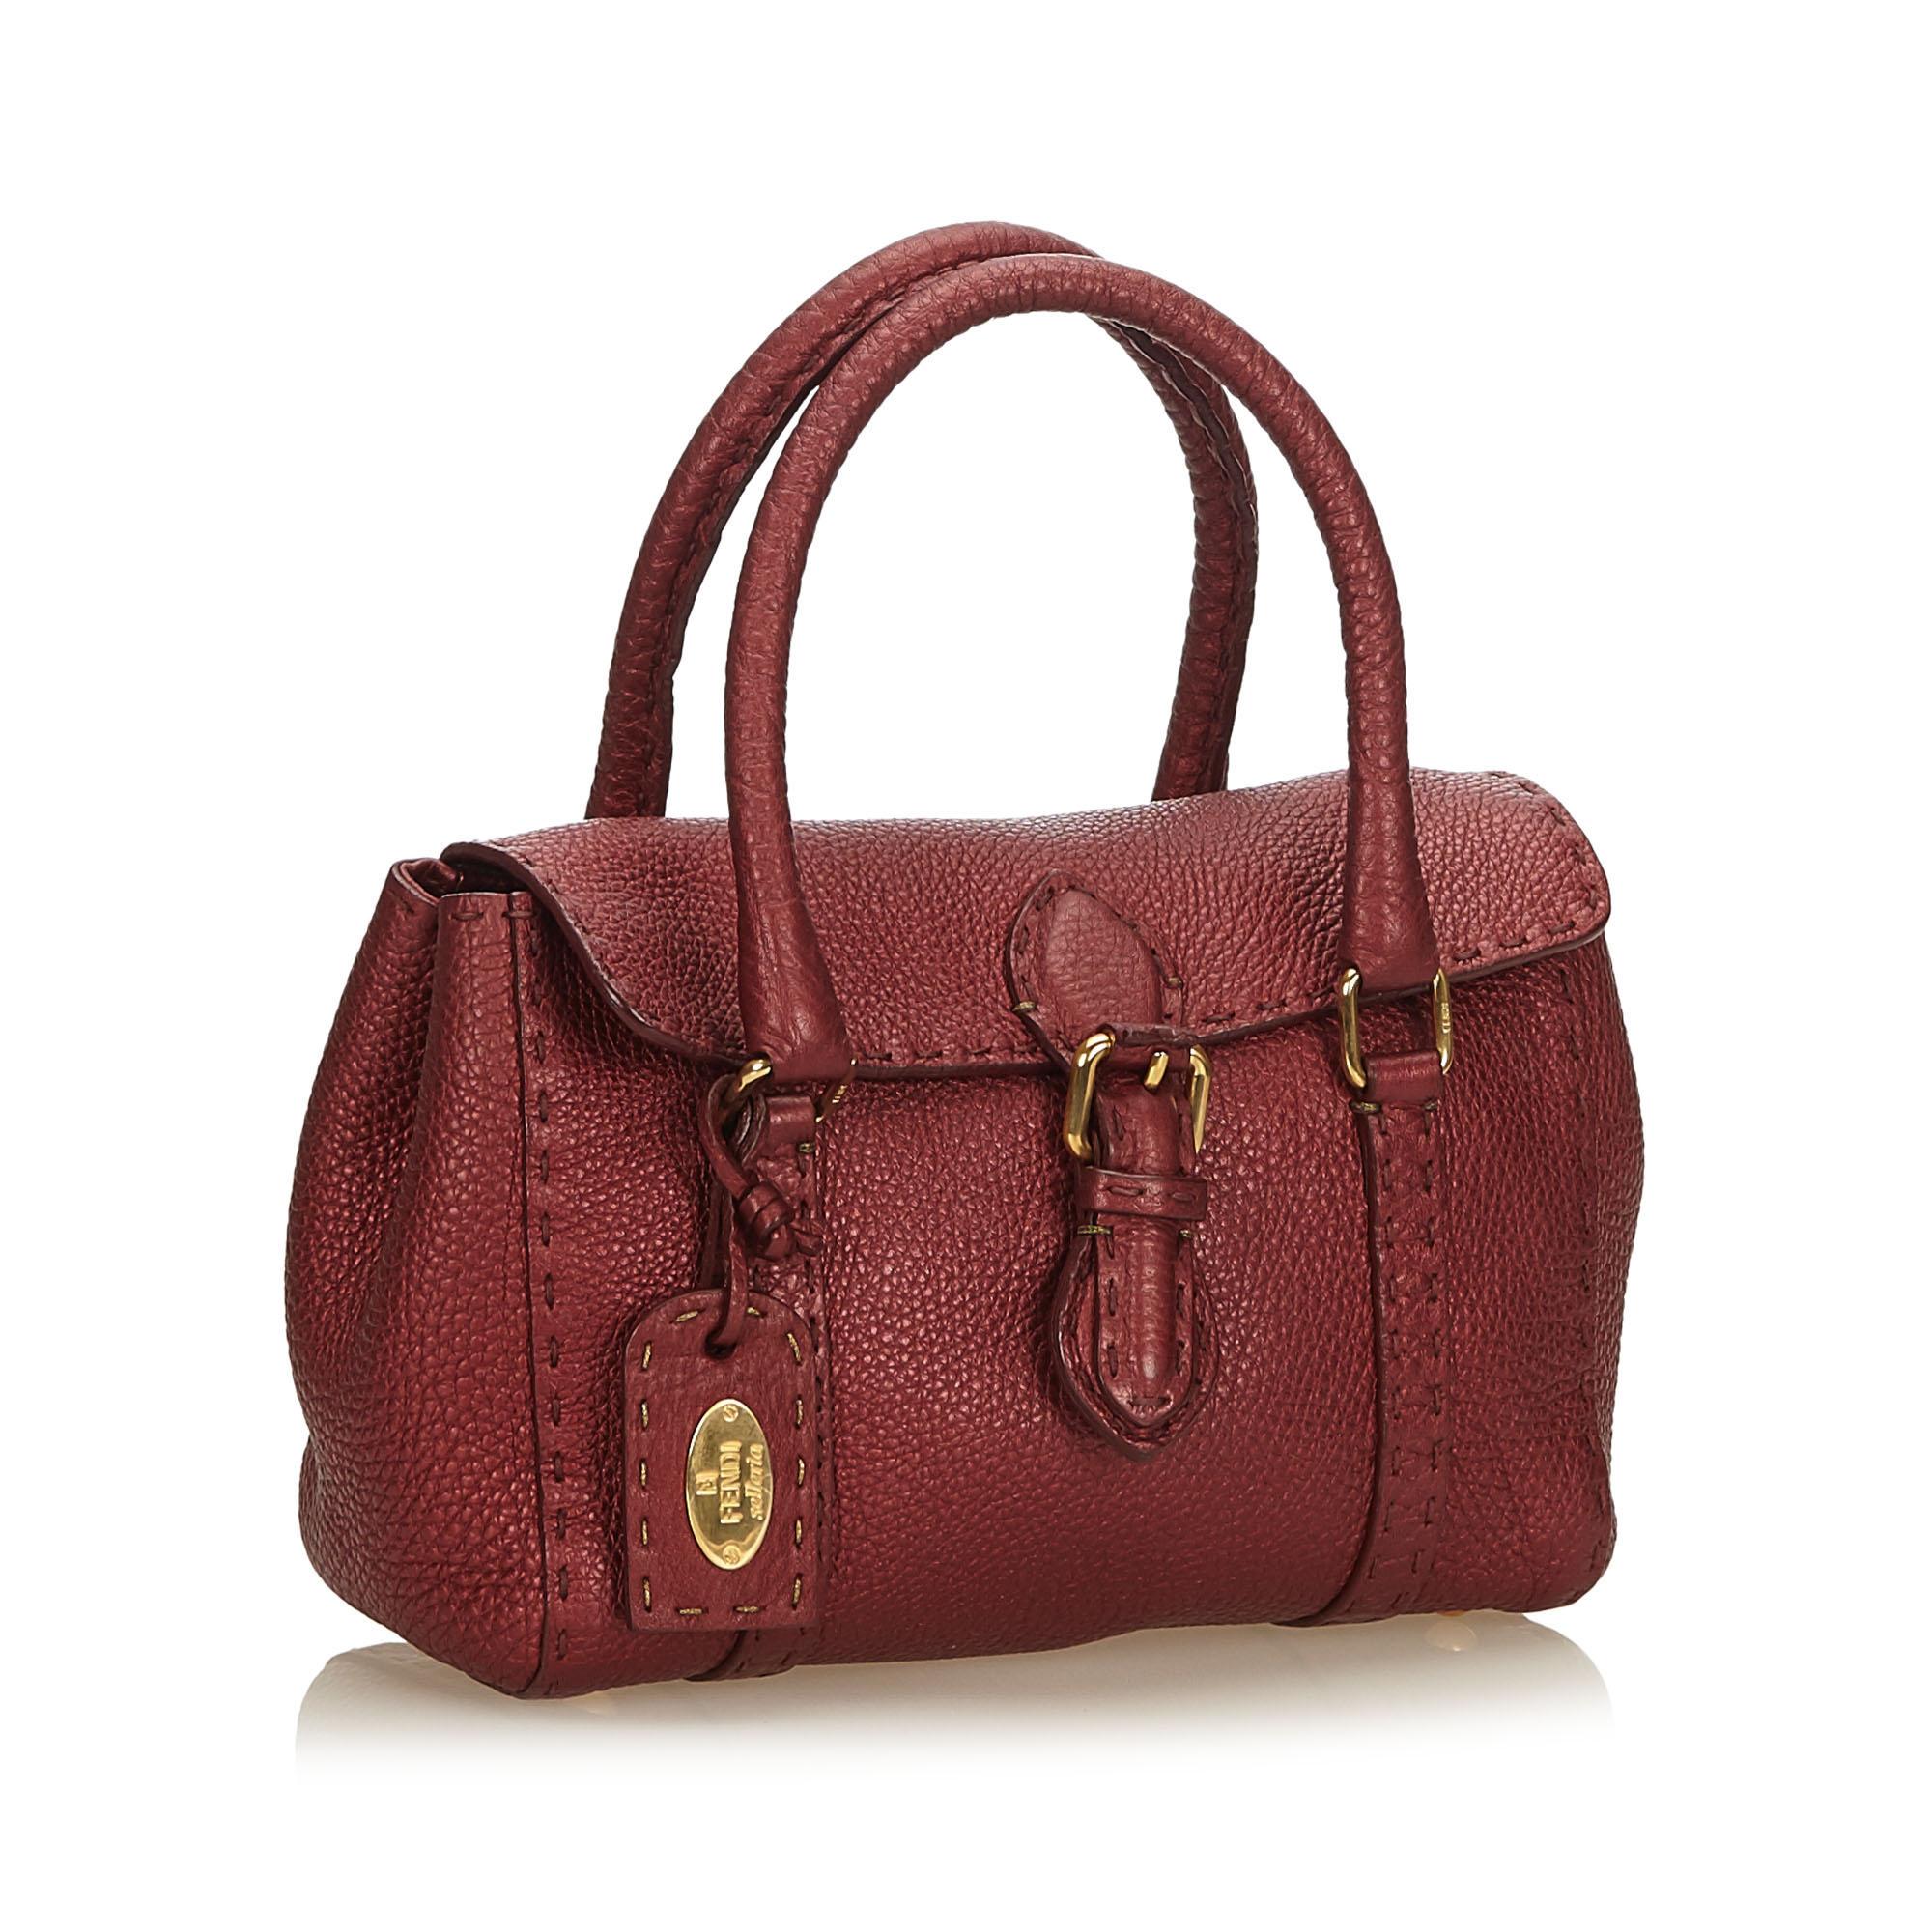 The Mini Linda features a leather body, rolled leather handles, top flap with buckle closure, and an interior zip pocket. It carries as A condition rating.

Inclusions: 
Dust Bag

Dimensions:
Length: 15.00 cm
Width: 26.00 cm
Depth: 13.00 cm
Hand